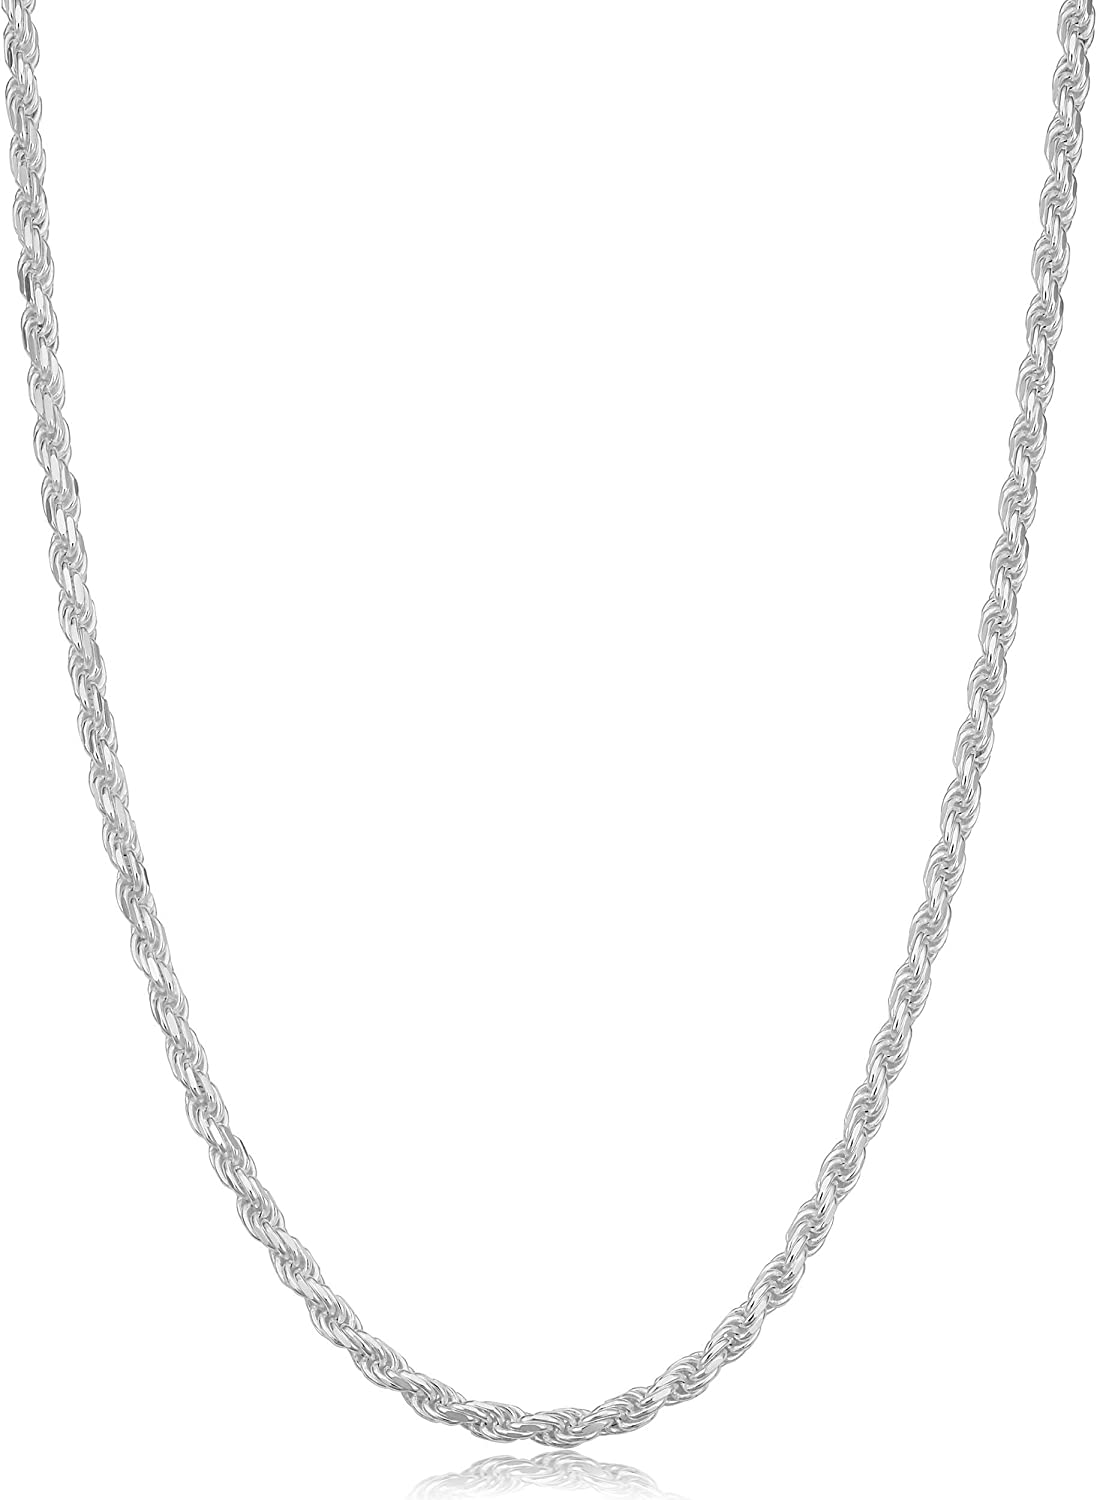 Sterling Silver Diamond Cut Rope Chain Necklace, 1.5MM - 3.5MM Braided Twist Rope Chain Neclace, 925 Sterling Silver Necklace